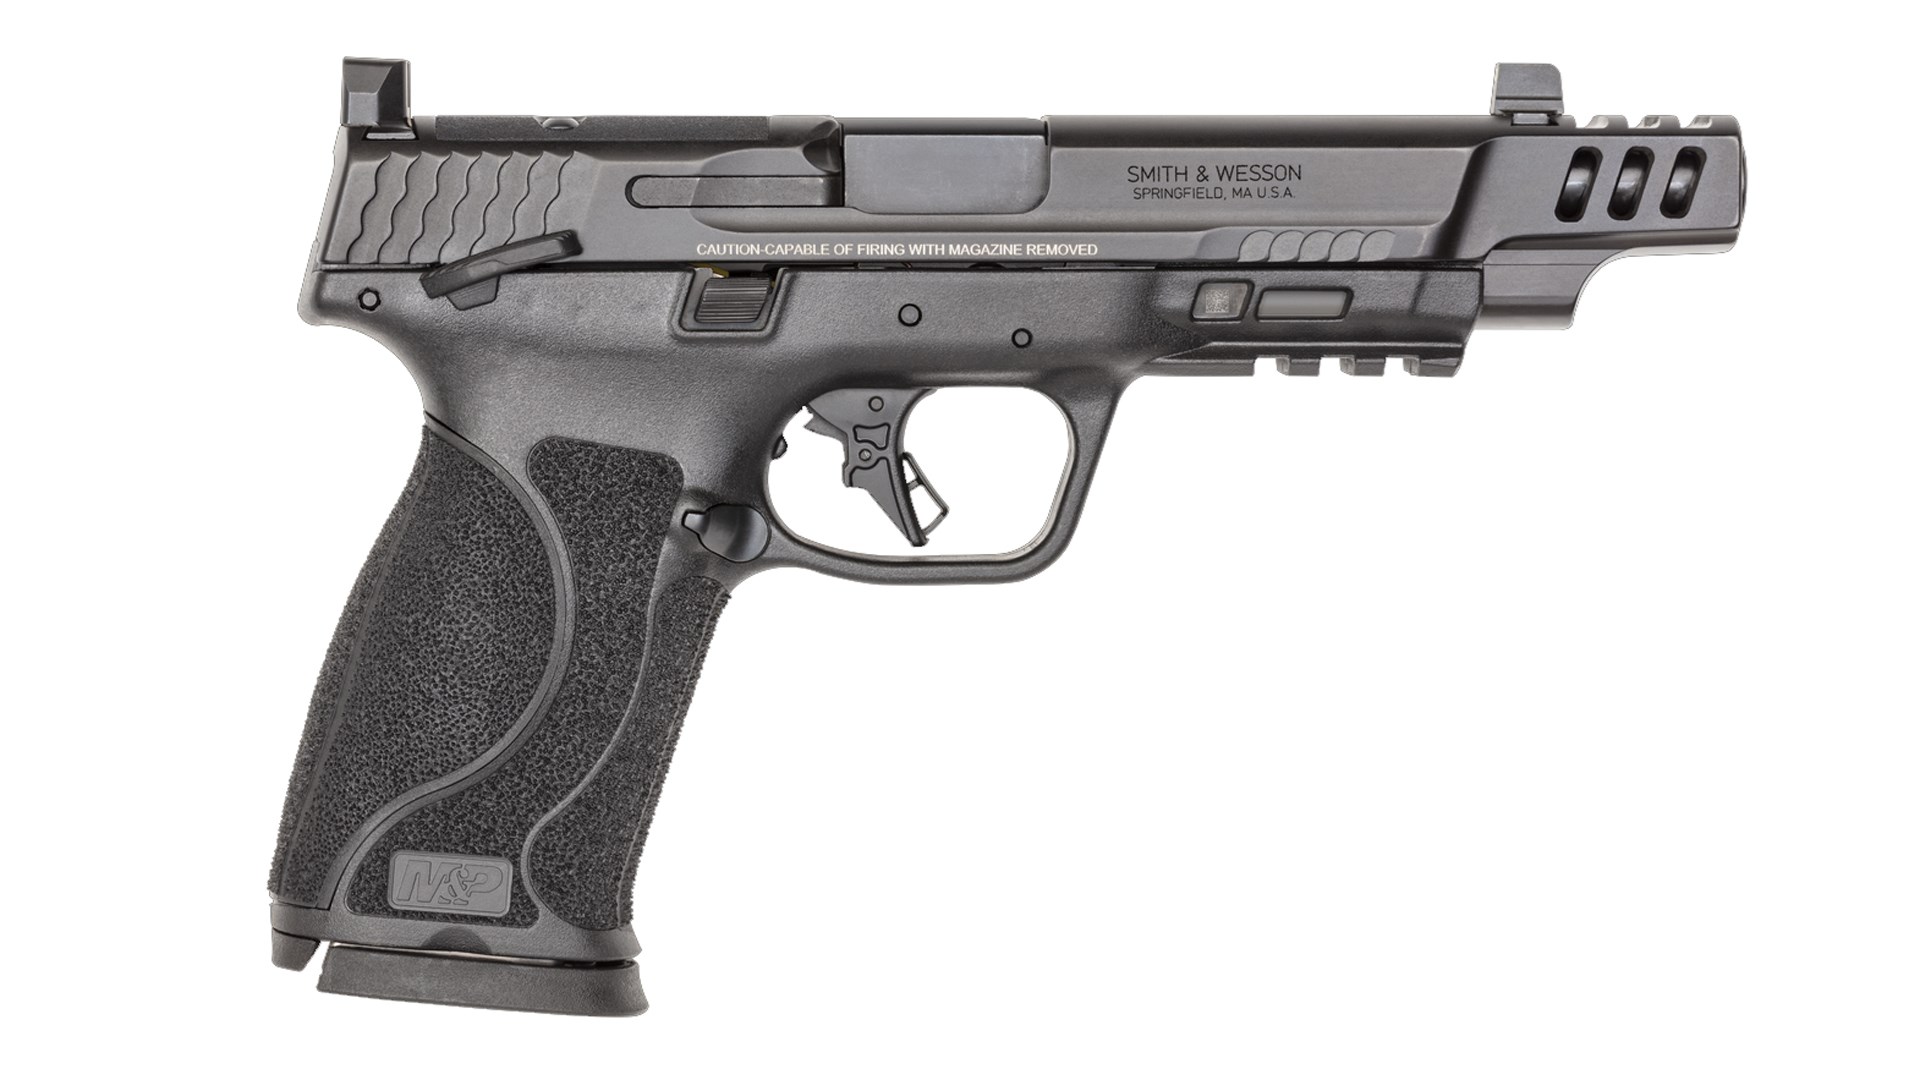 A Smith & Wesson M&P 10 mm Performance Center Edition's right side shown on white.